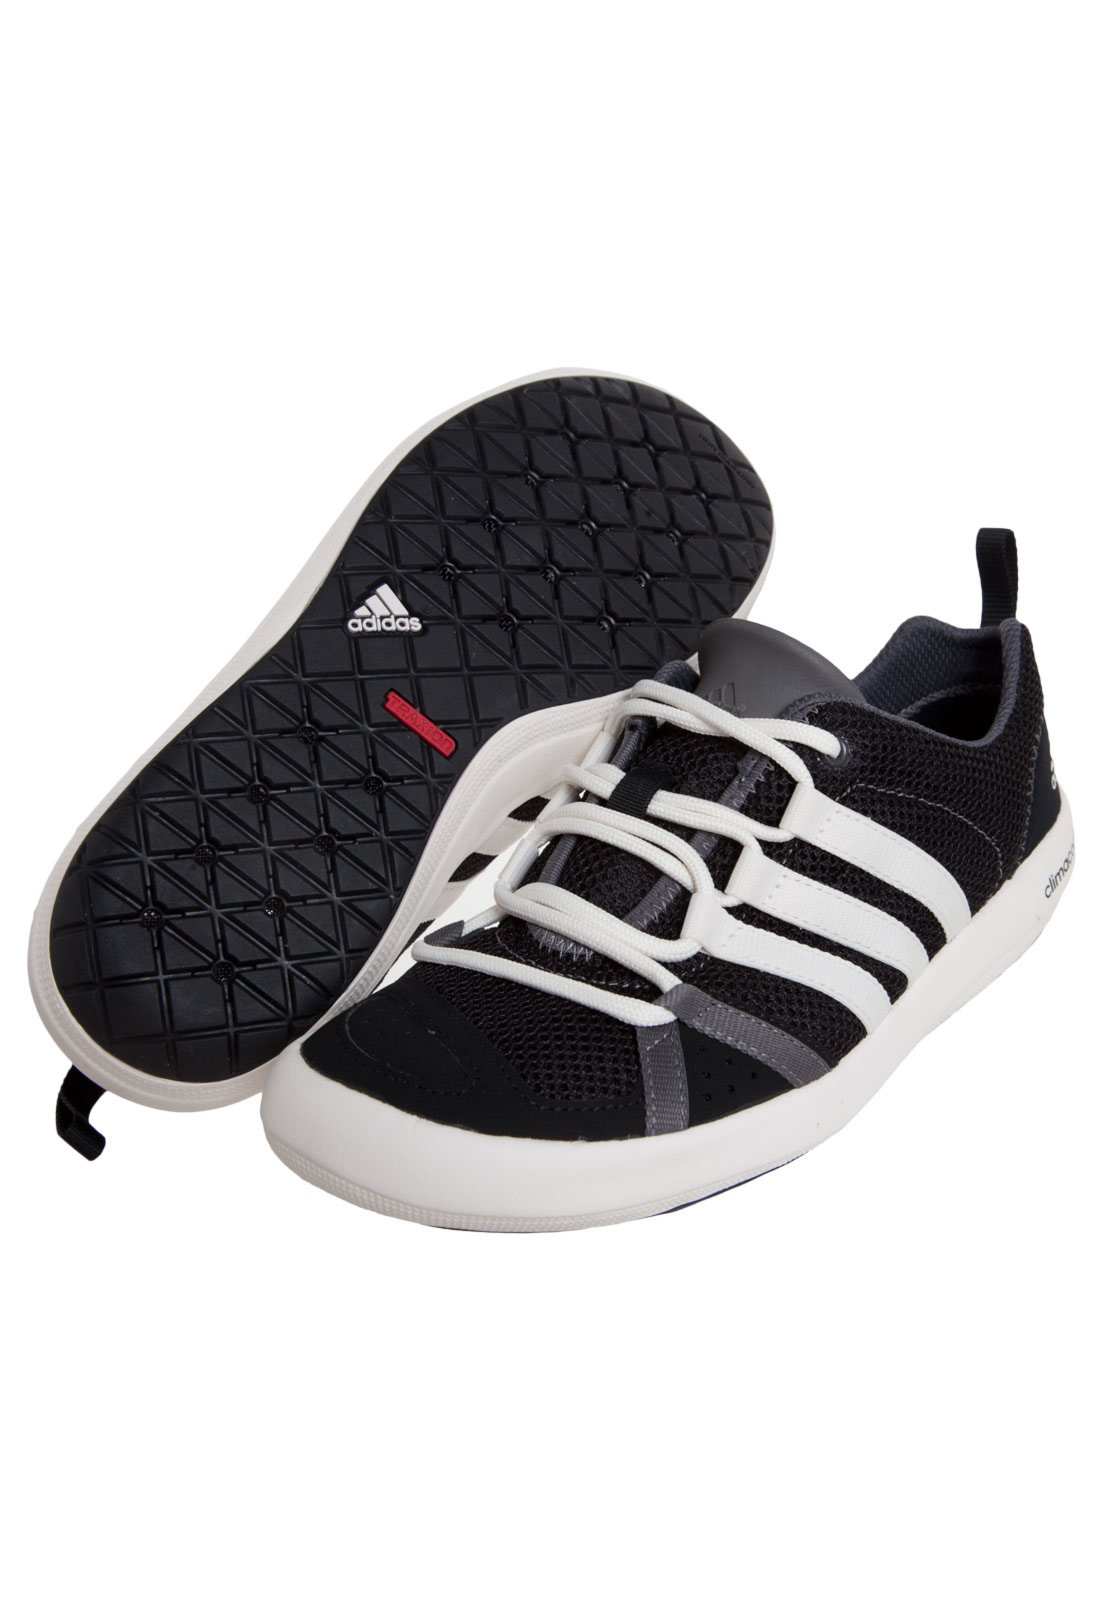 tenis adidas boat lace